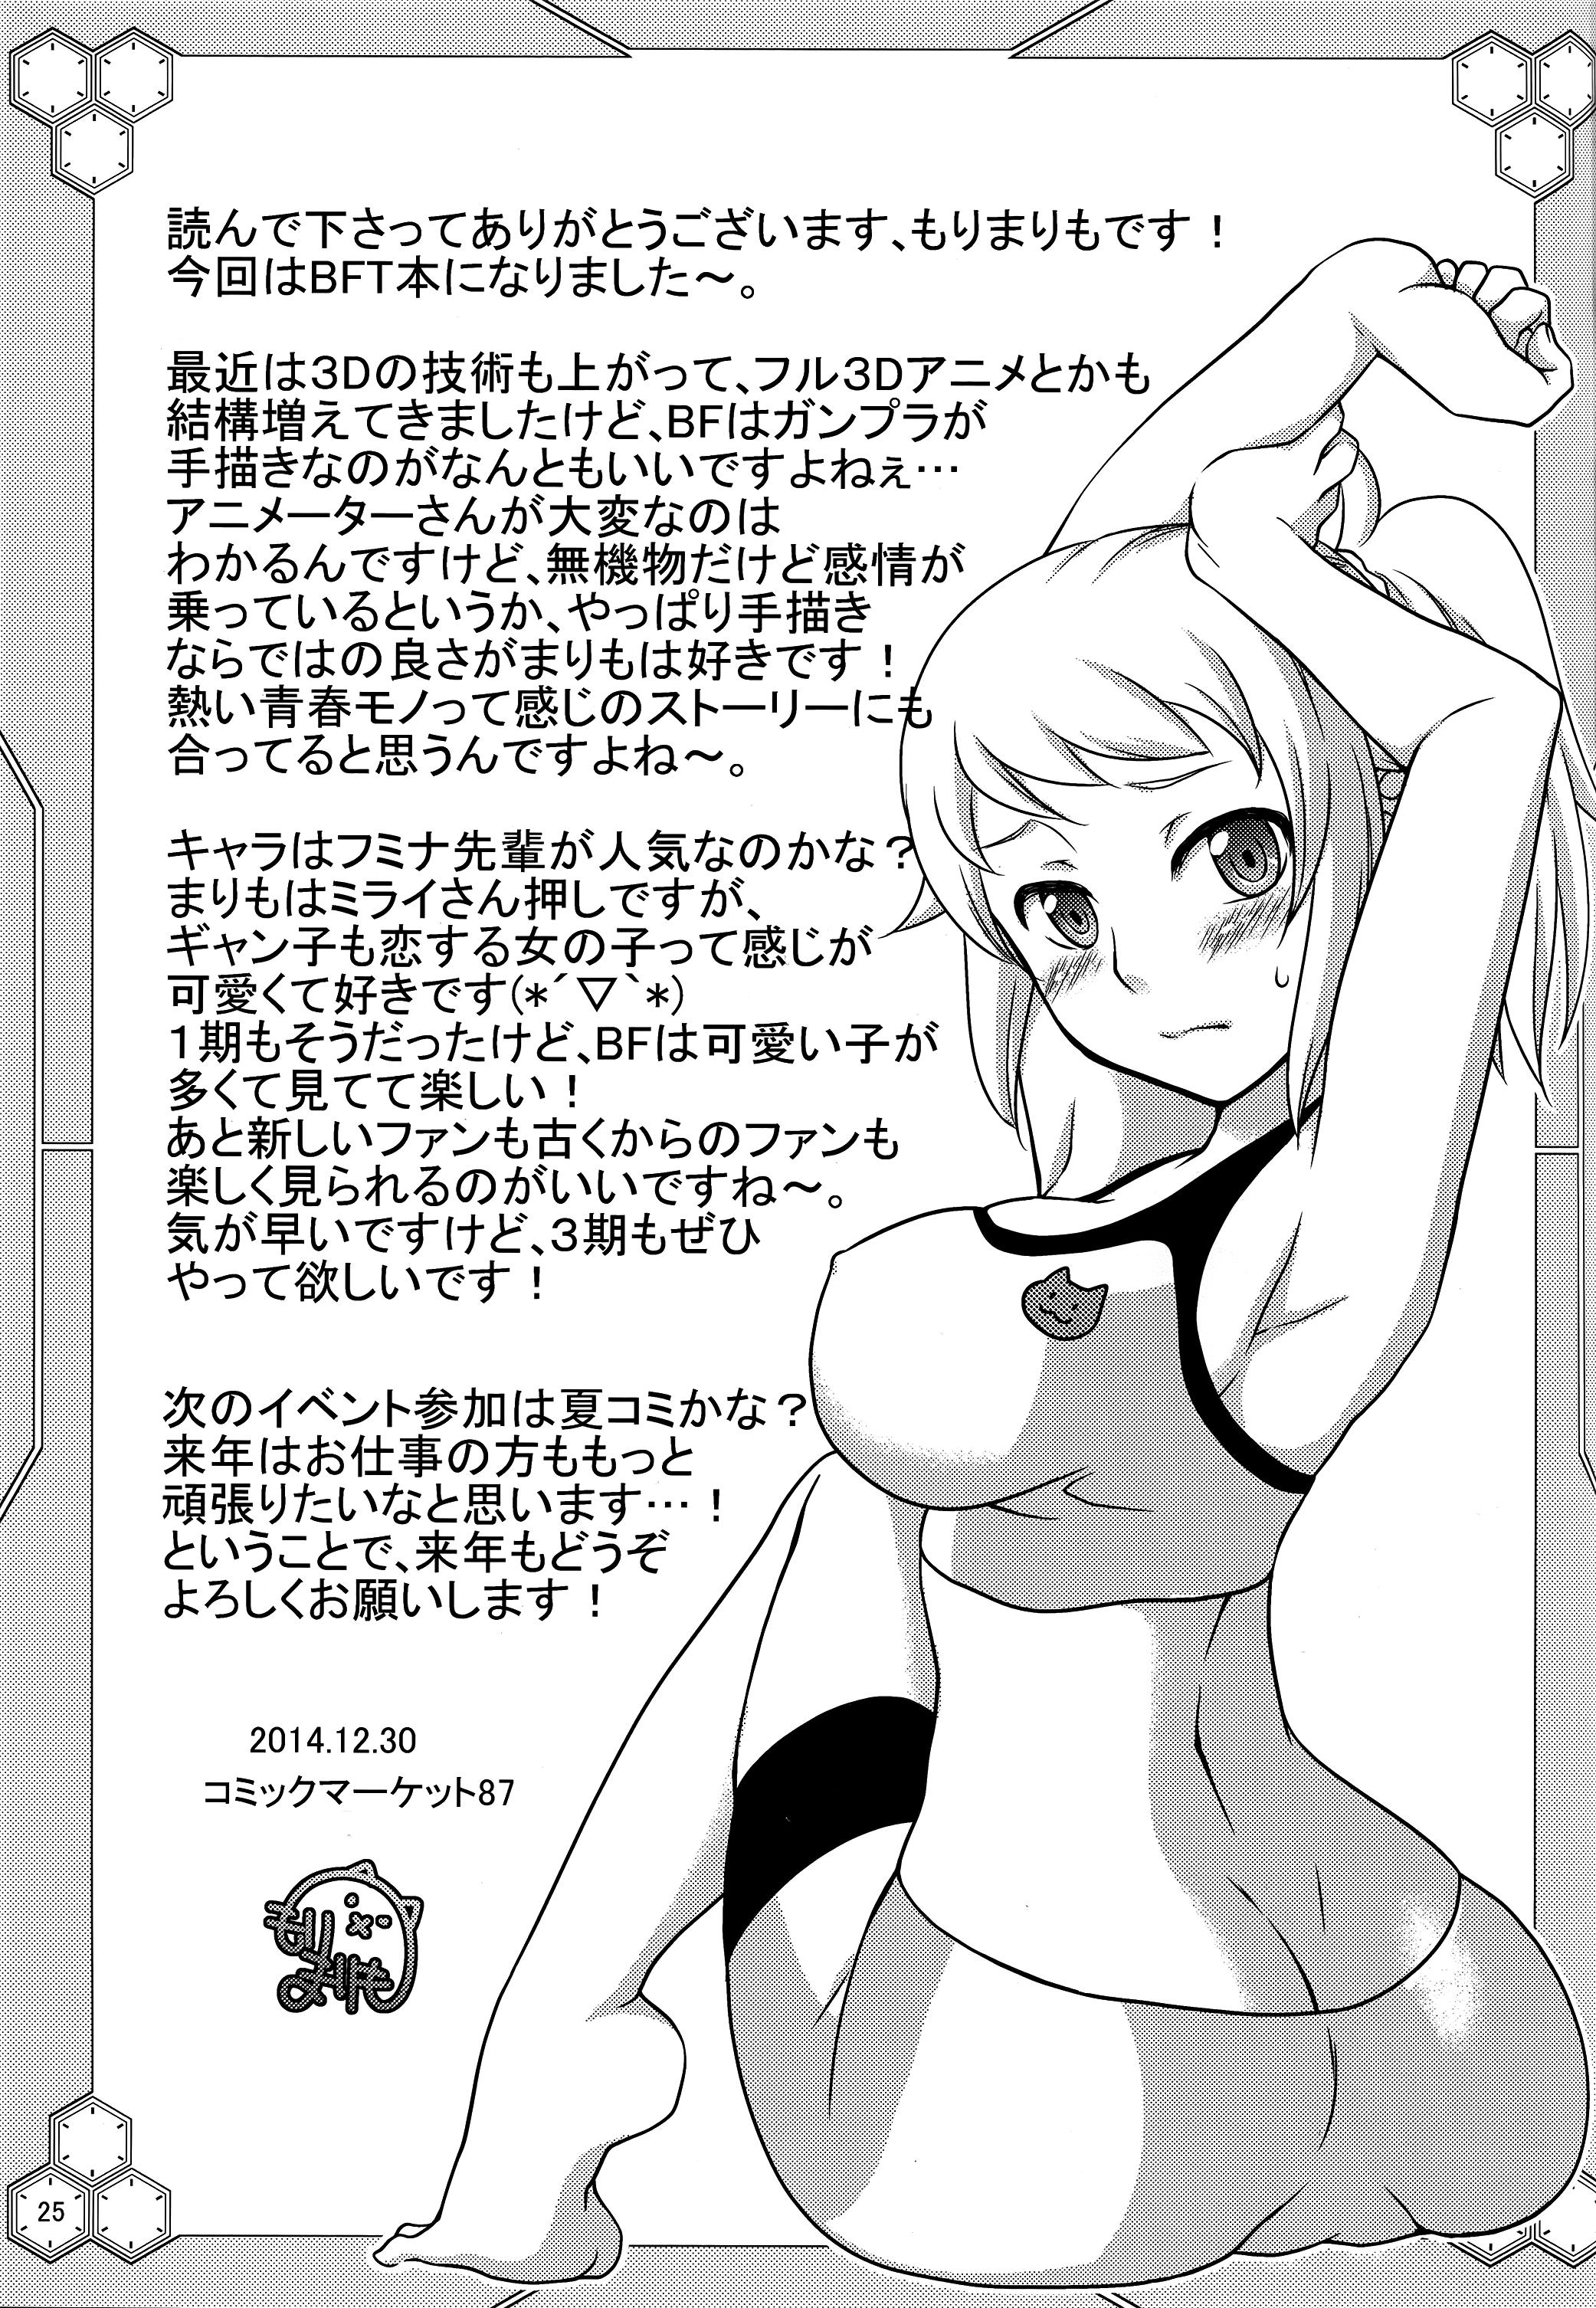 Pinay FIELD?? POOLSIDE - Gundam build fighters try Erotic - Page 25